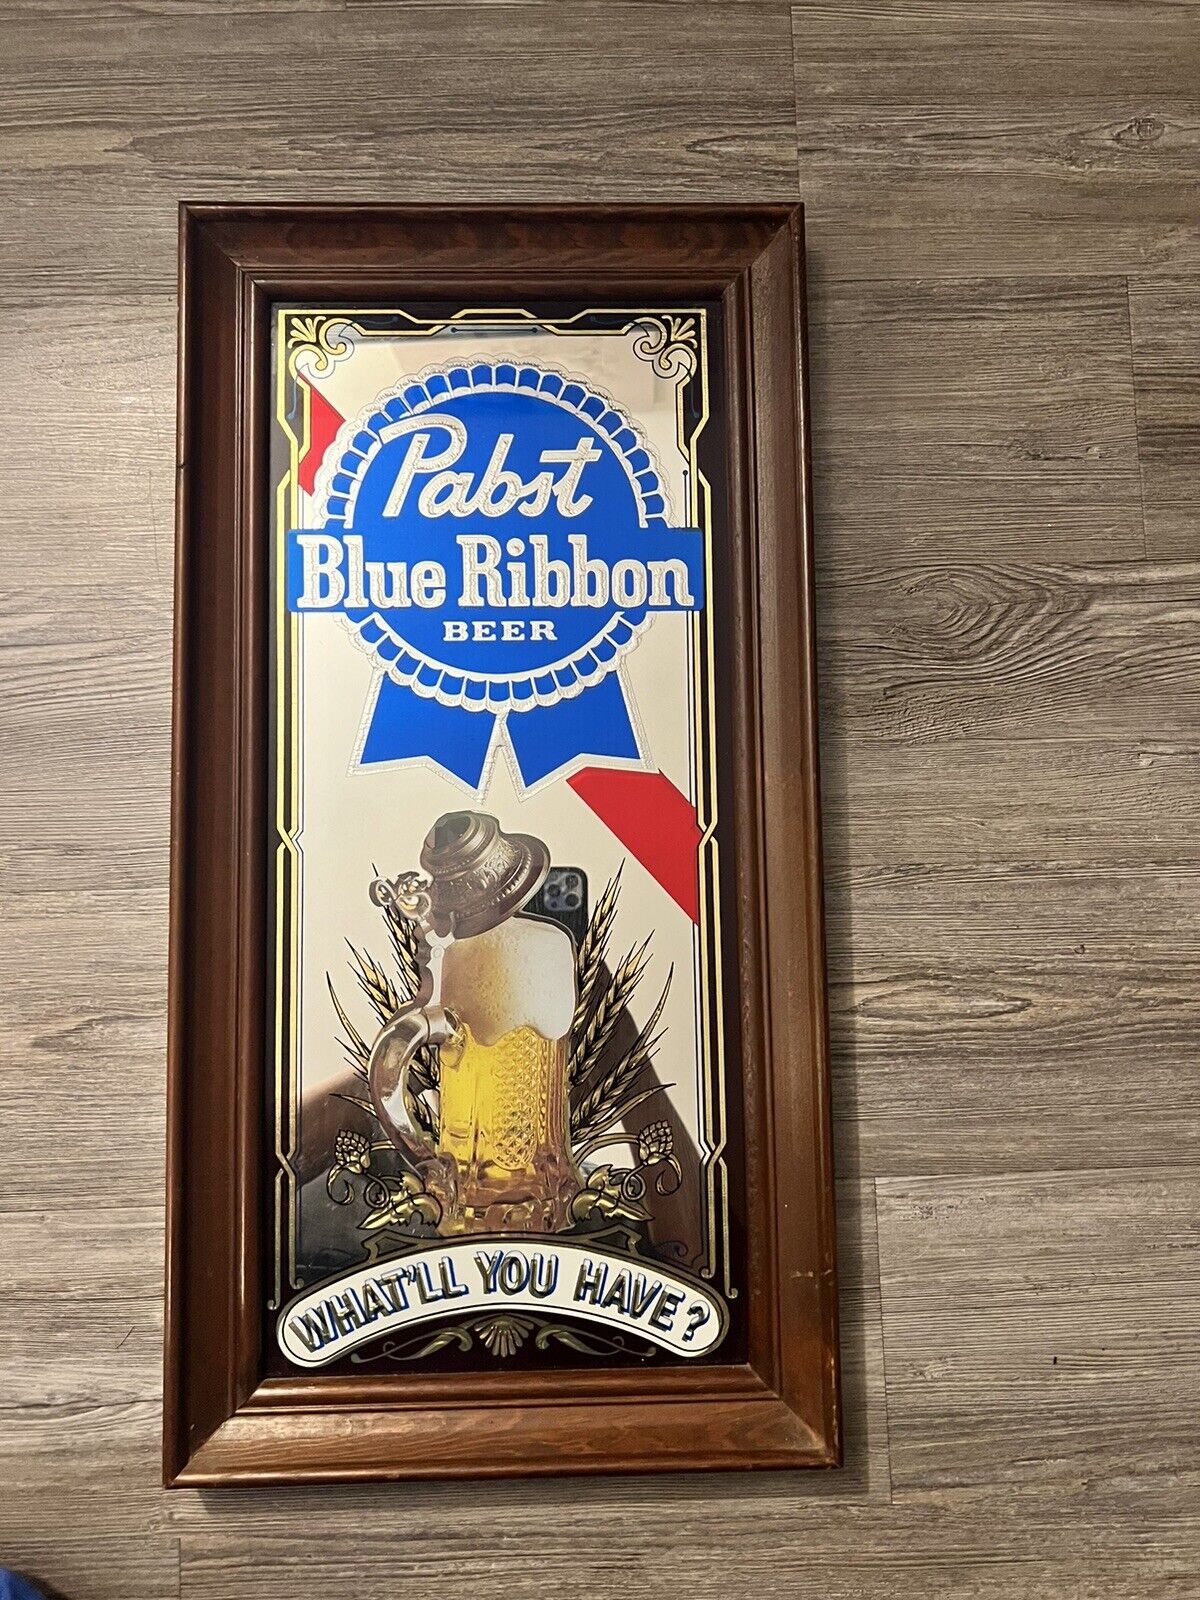 Vintage Original Pabst Blue Ribbon Beer Mirror Sign What’ll You Have?